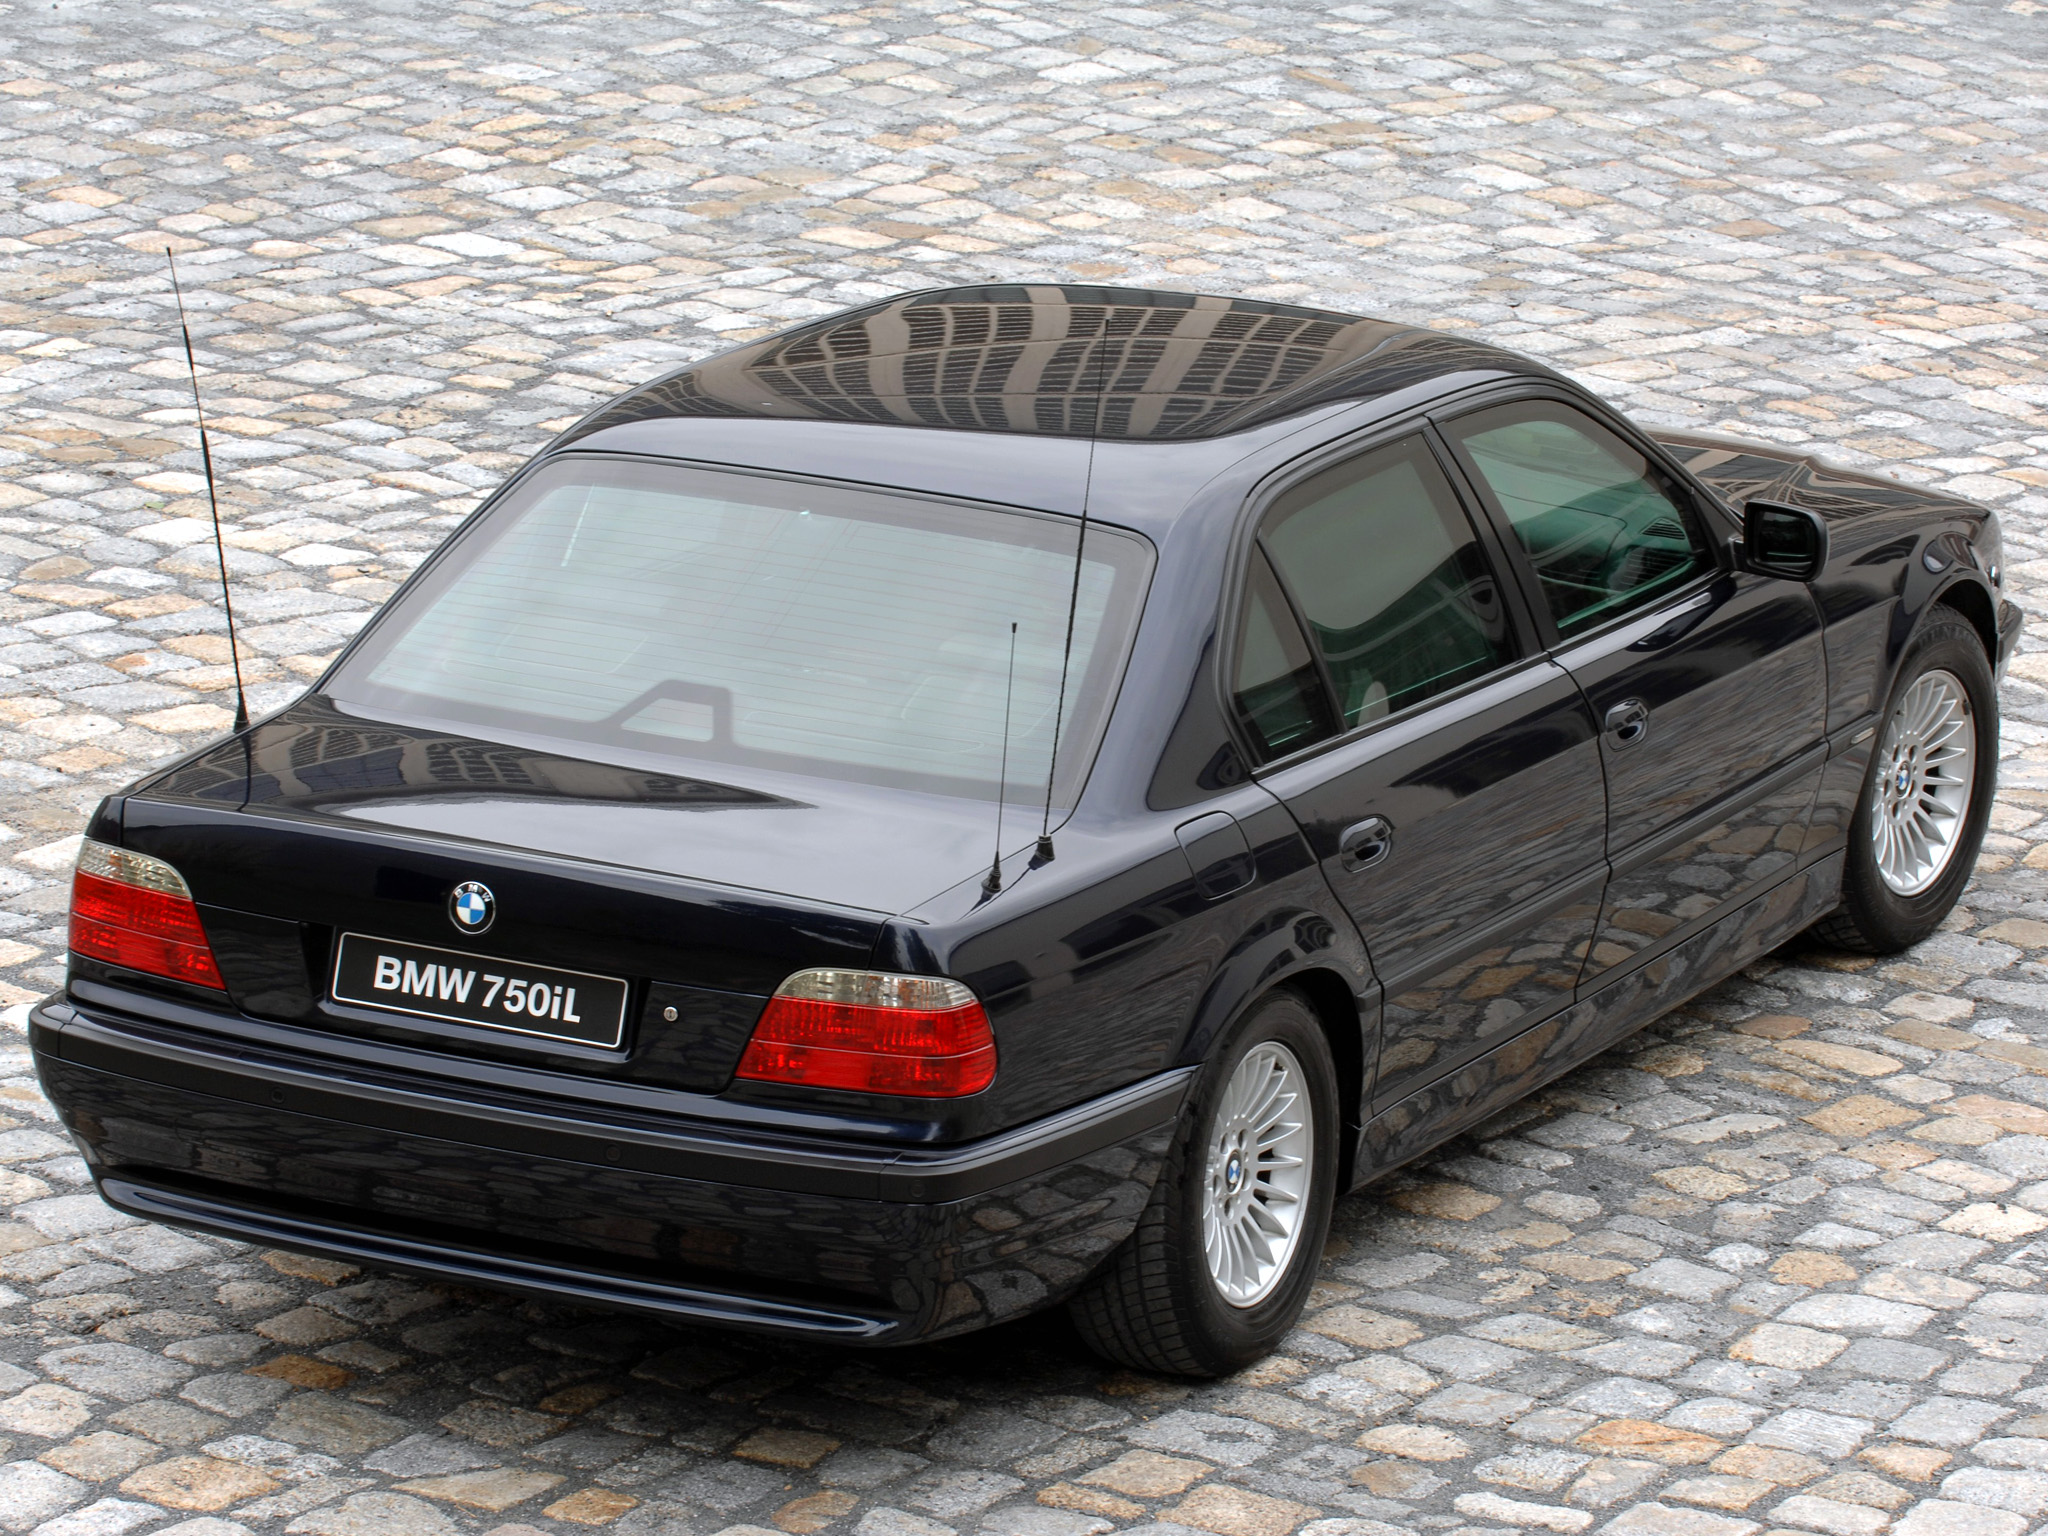 1998, Armored, Bmw, 750il, Security, E38, Luxury Wallpaper